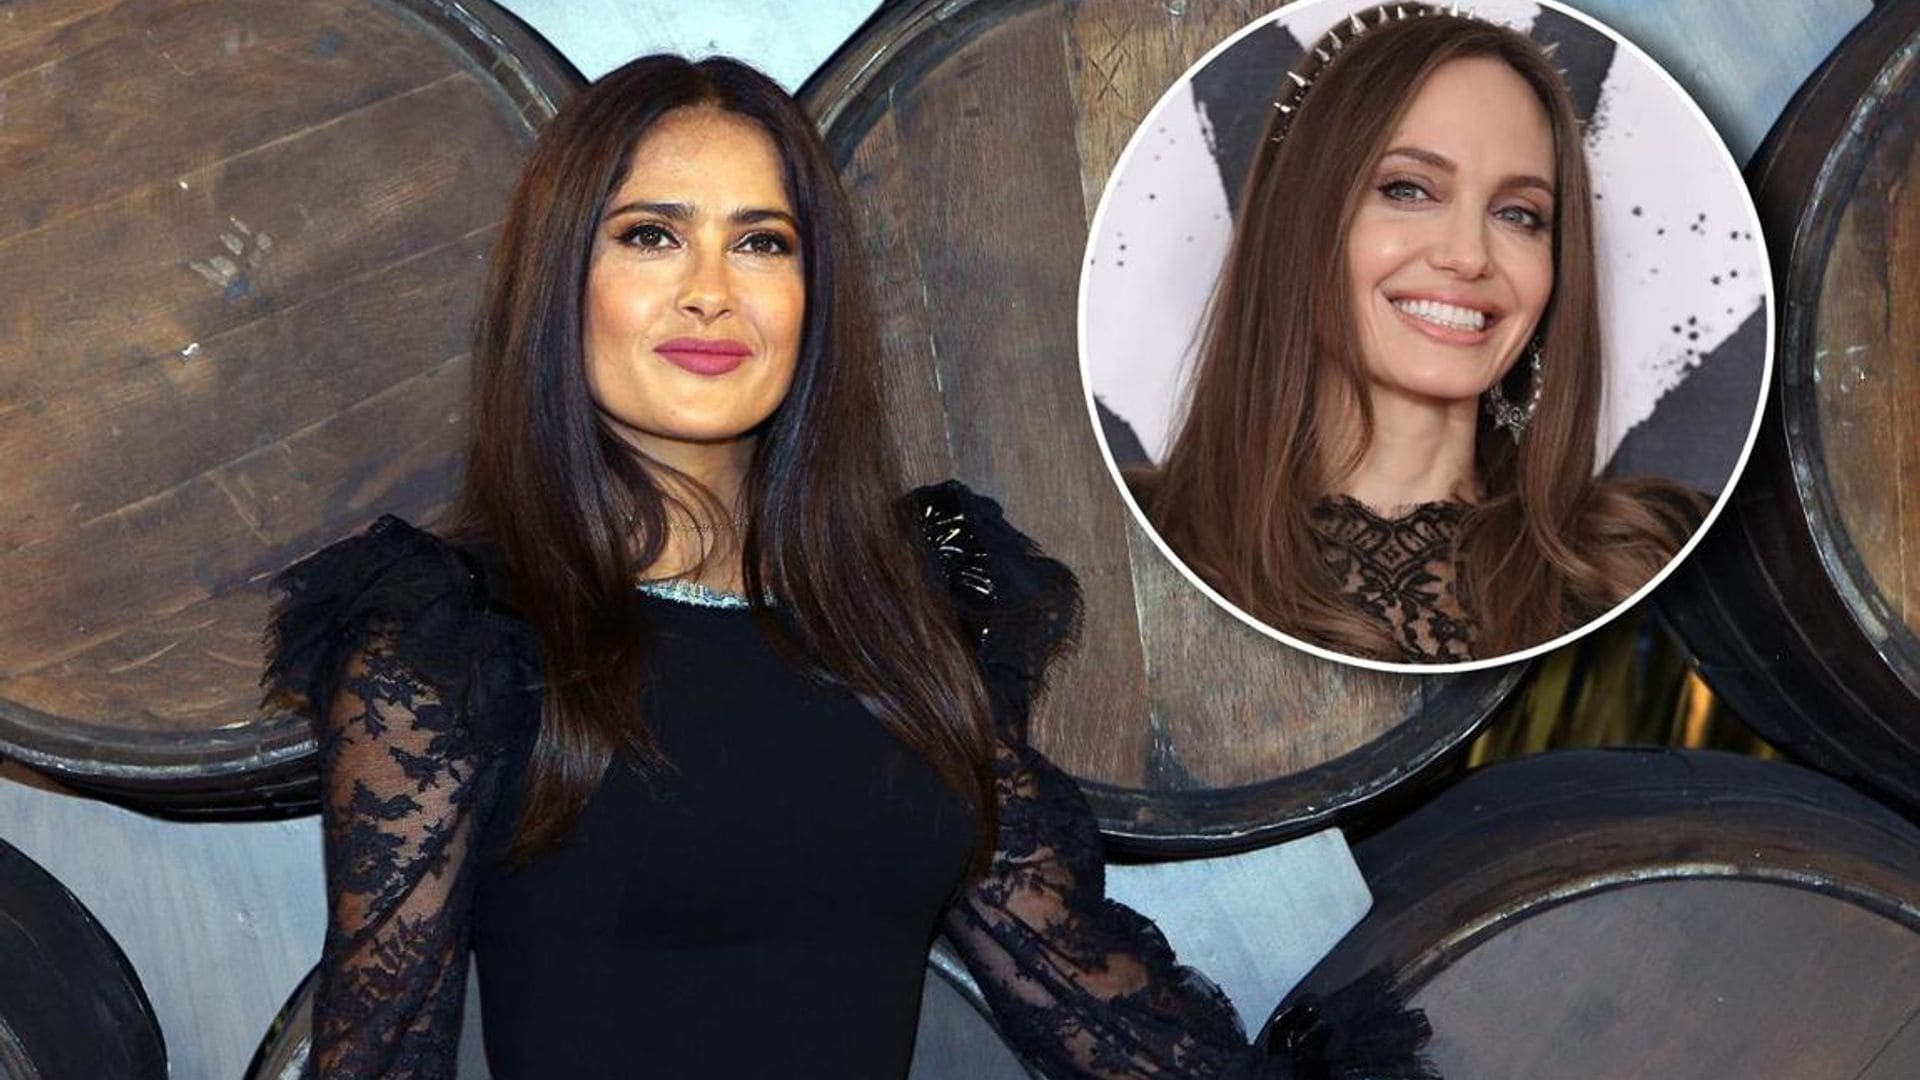 Salma Hayek and Angelina Jolie friends on set of Marvel's The Eternals